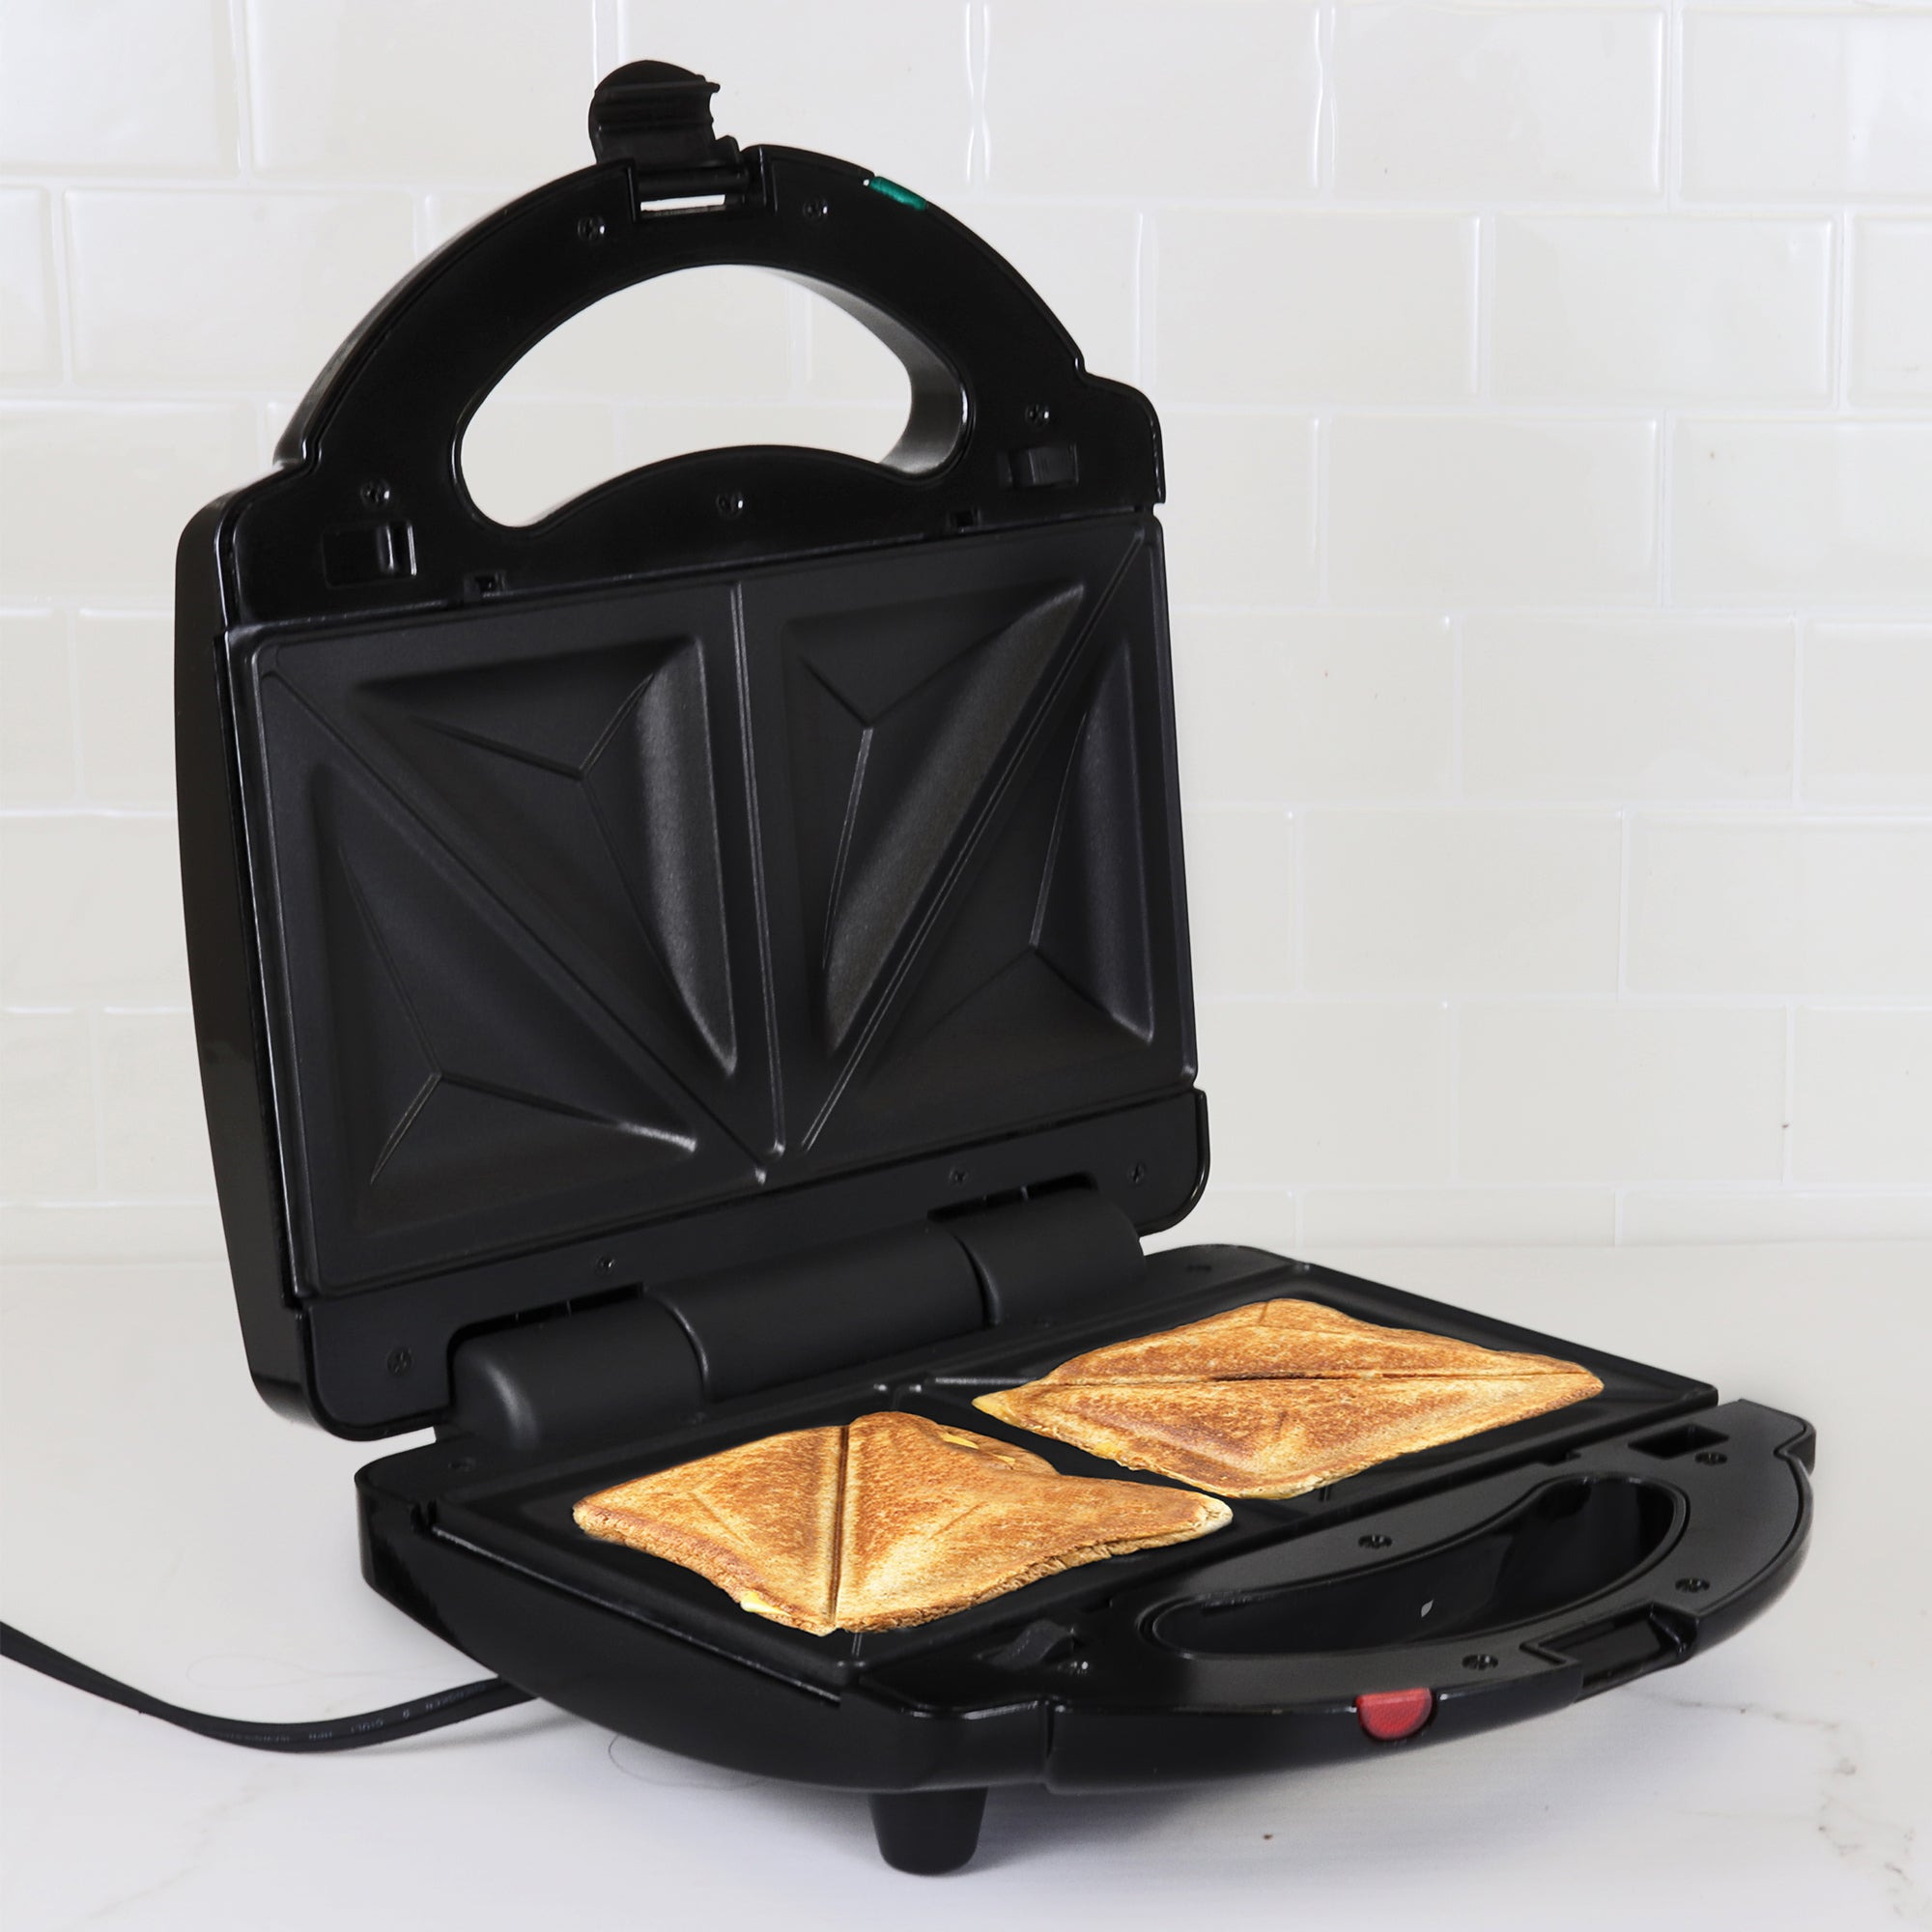 Lifestyle image of 4 in 1 grill open with grilled cheese sandwiches inside on a white countertop with a white tile backsplash behind